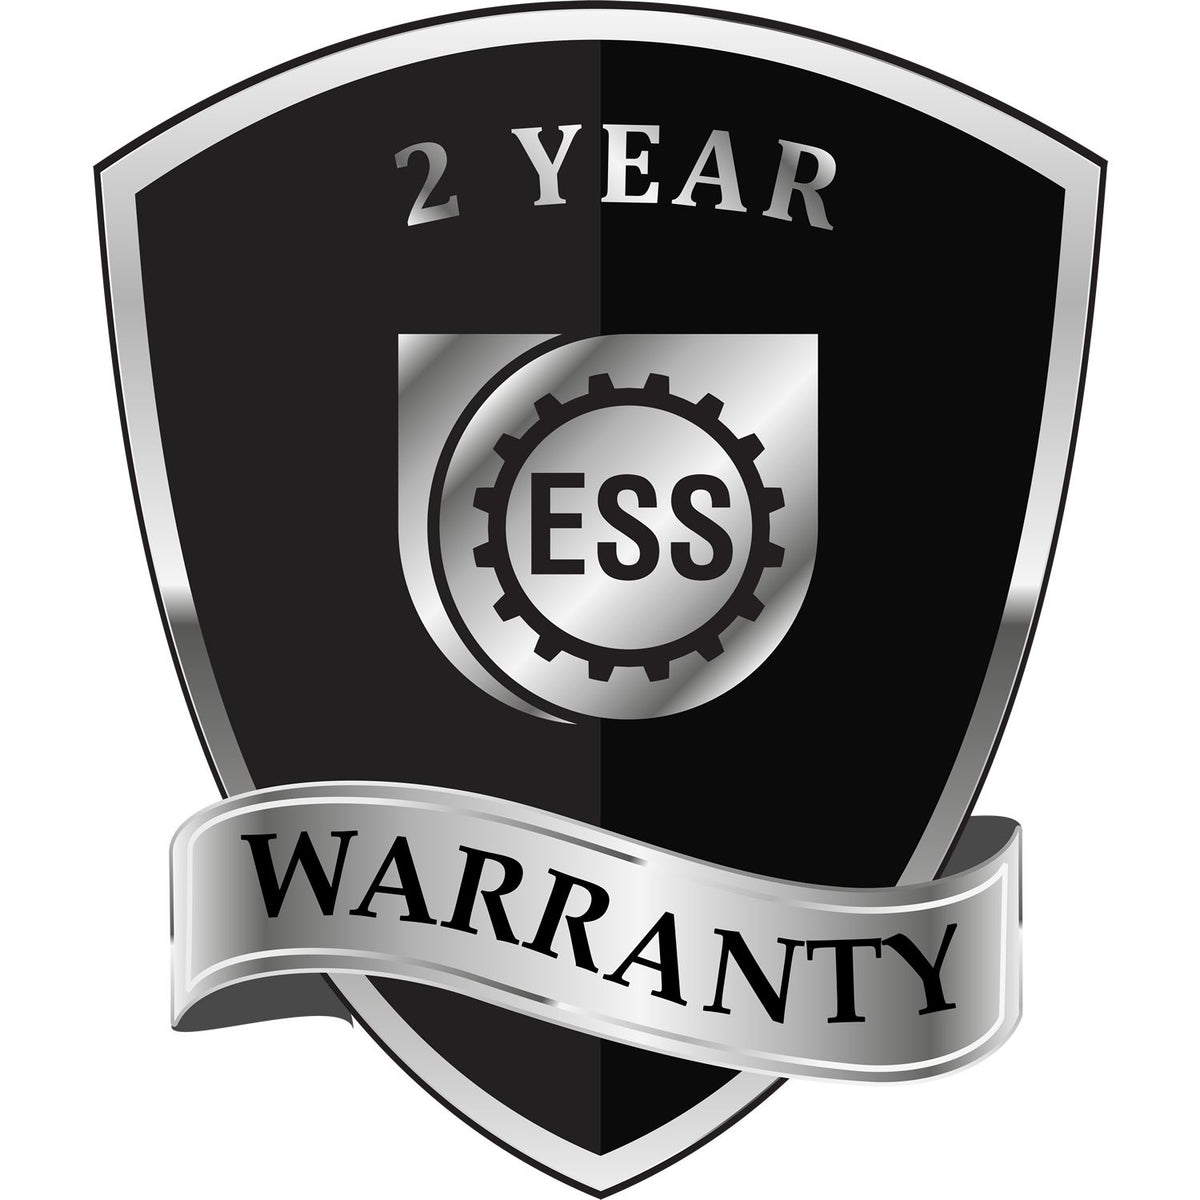 A black and silver badge or emblem showing warranty information for the Gift Connecticut Architect Seal